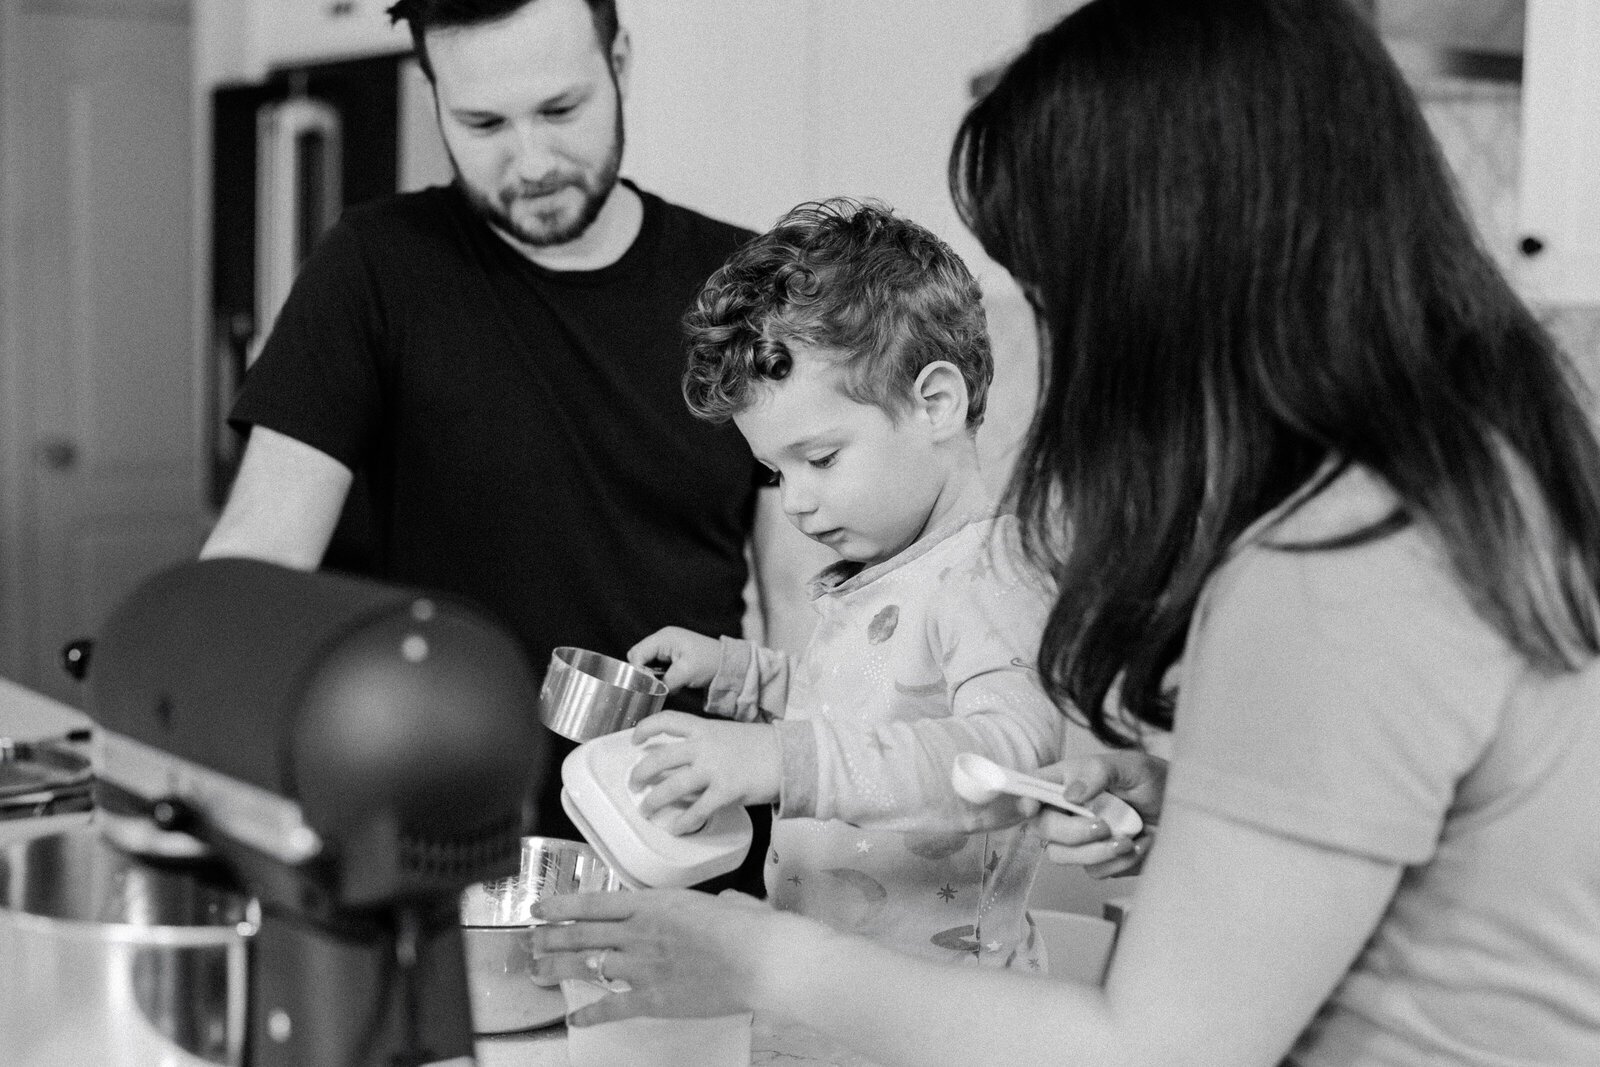 Family bakes together during their Saturday morning family session